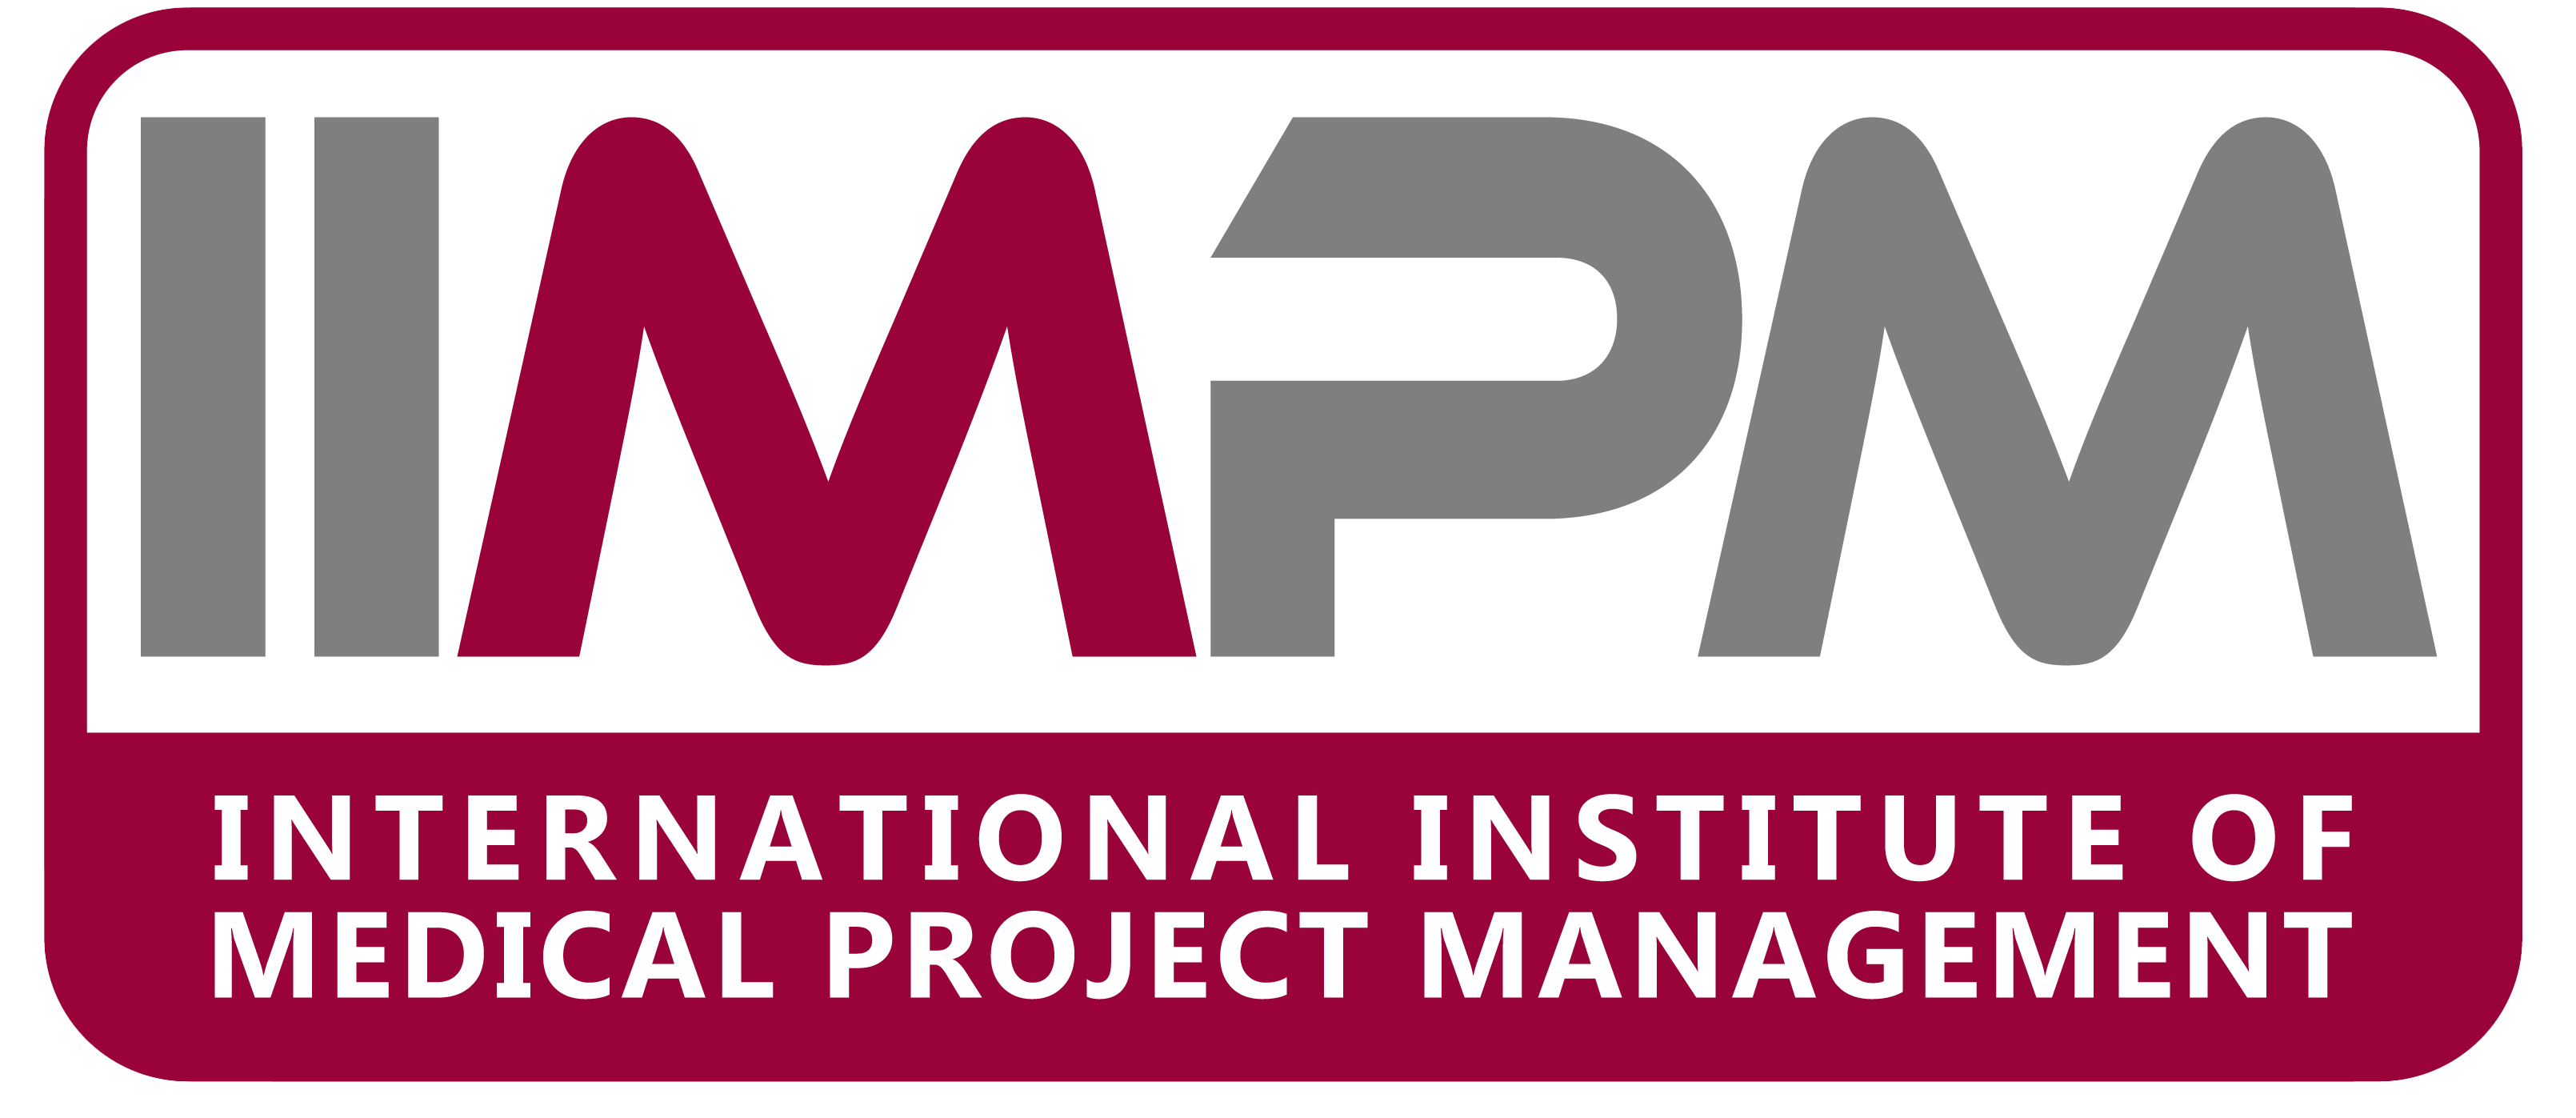 International Institute of Medical Project Management